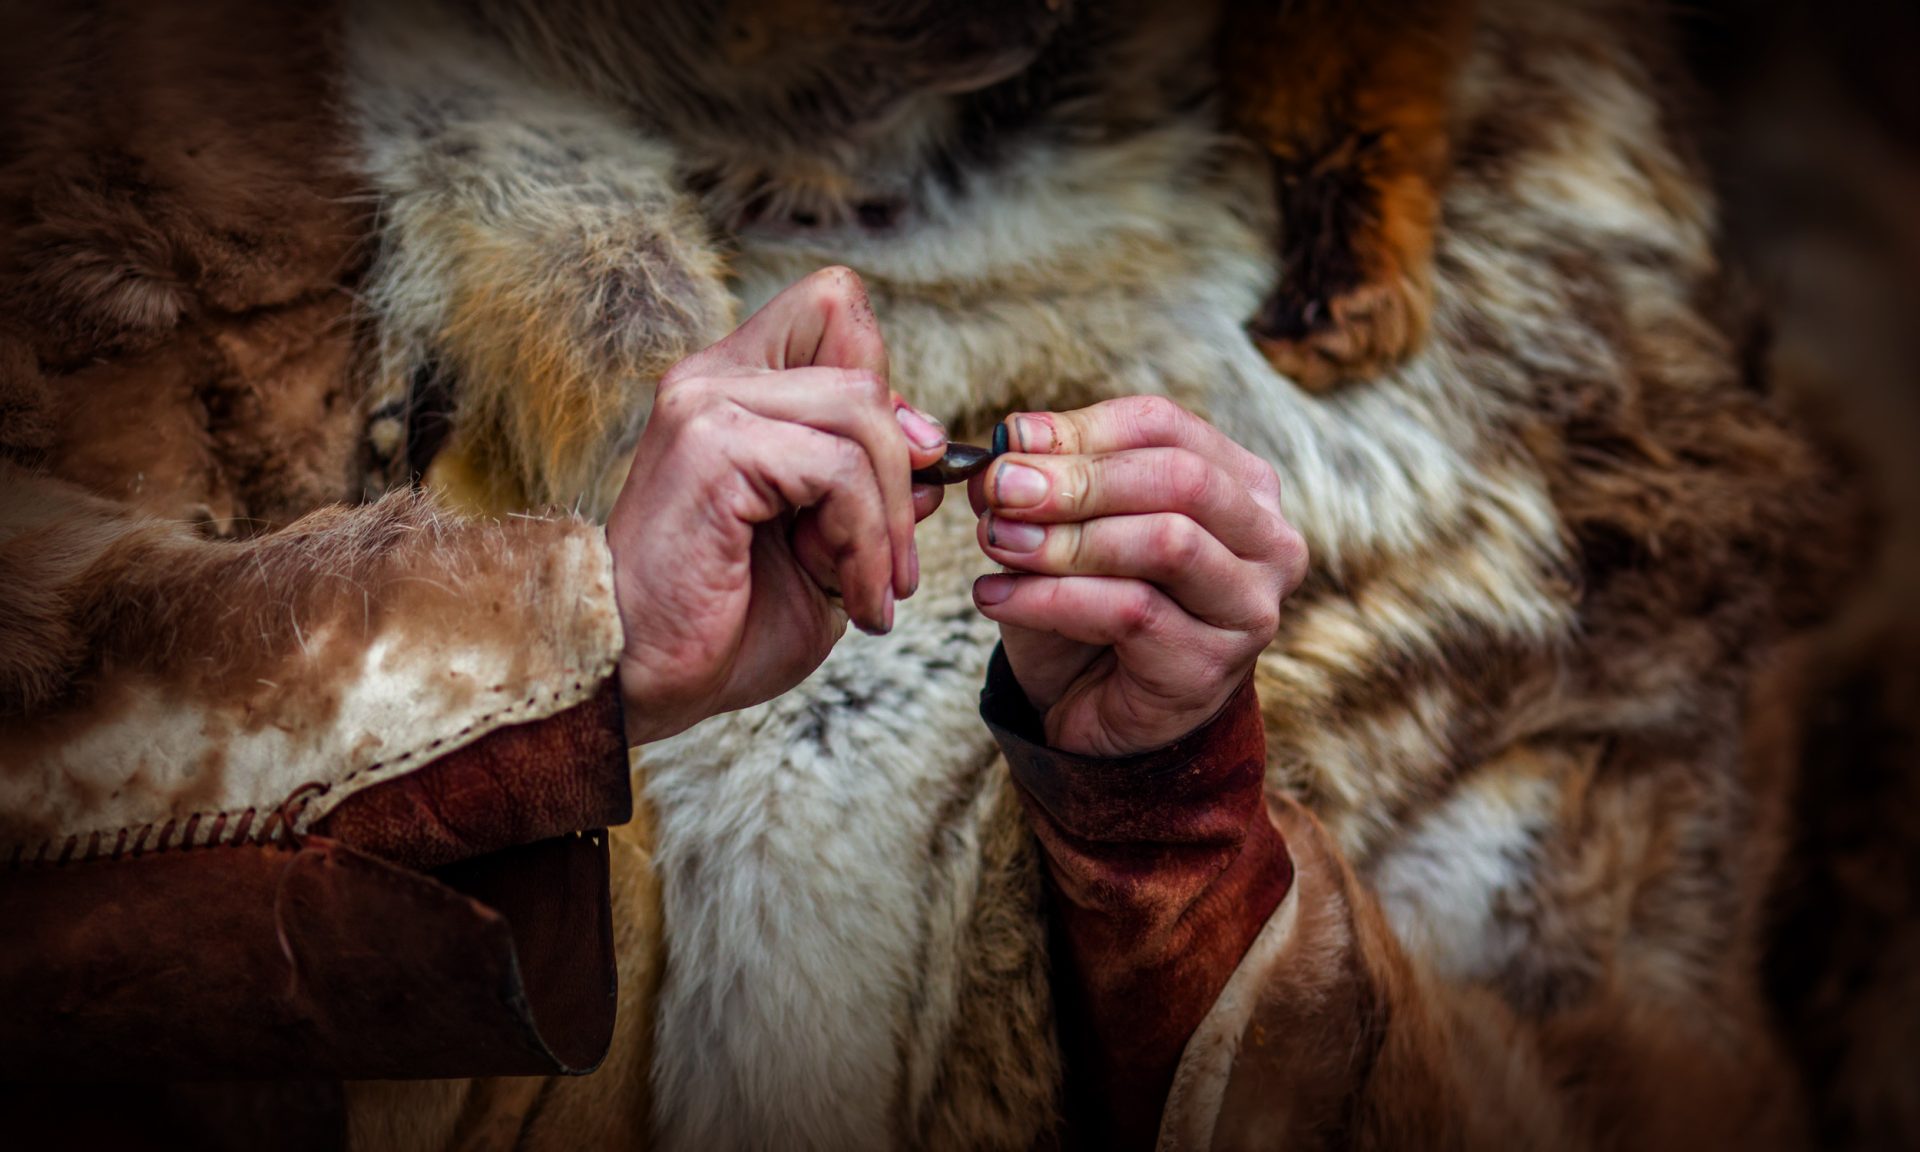 Close-up shot. A man dressed in Stone Age clothing grinds two small stones against each other.